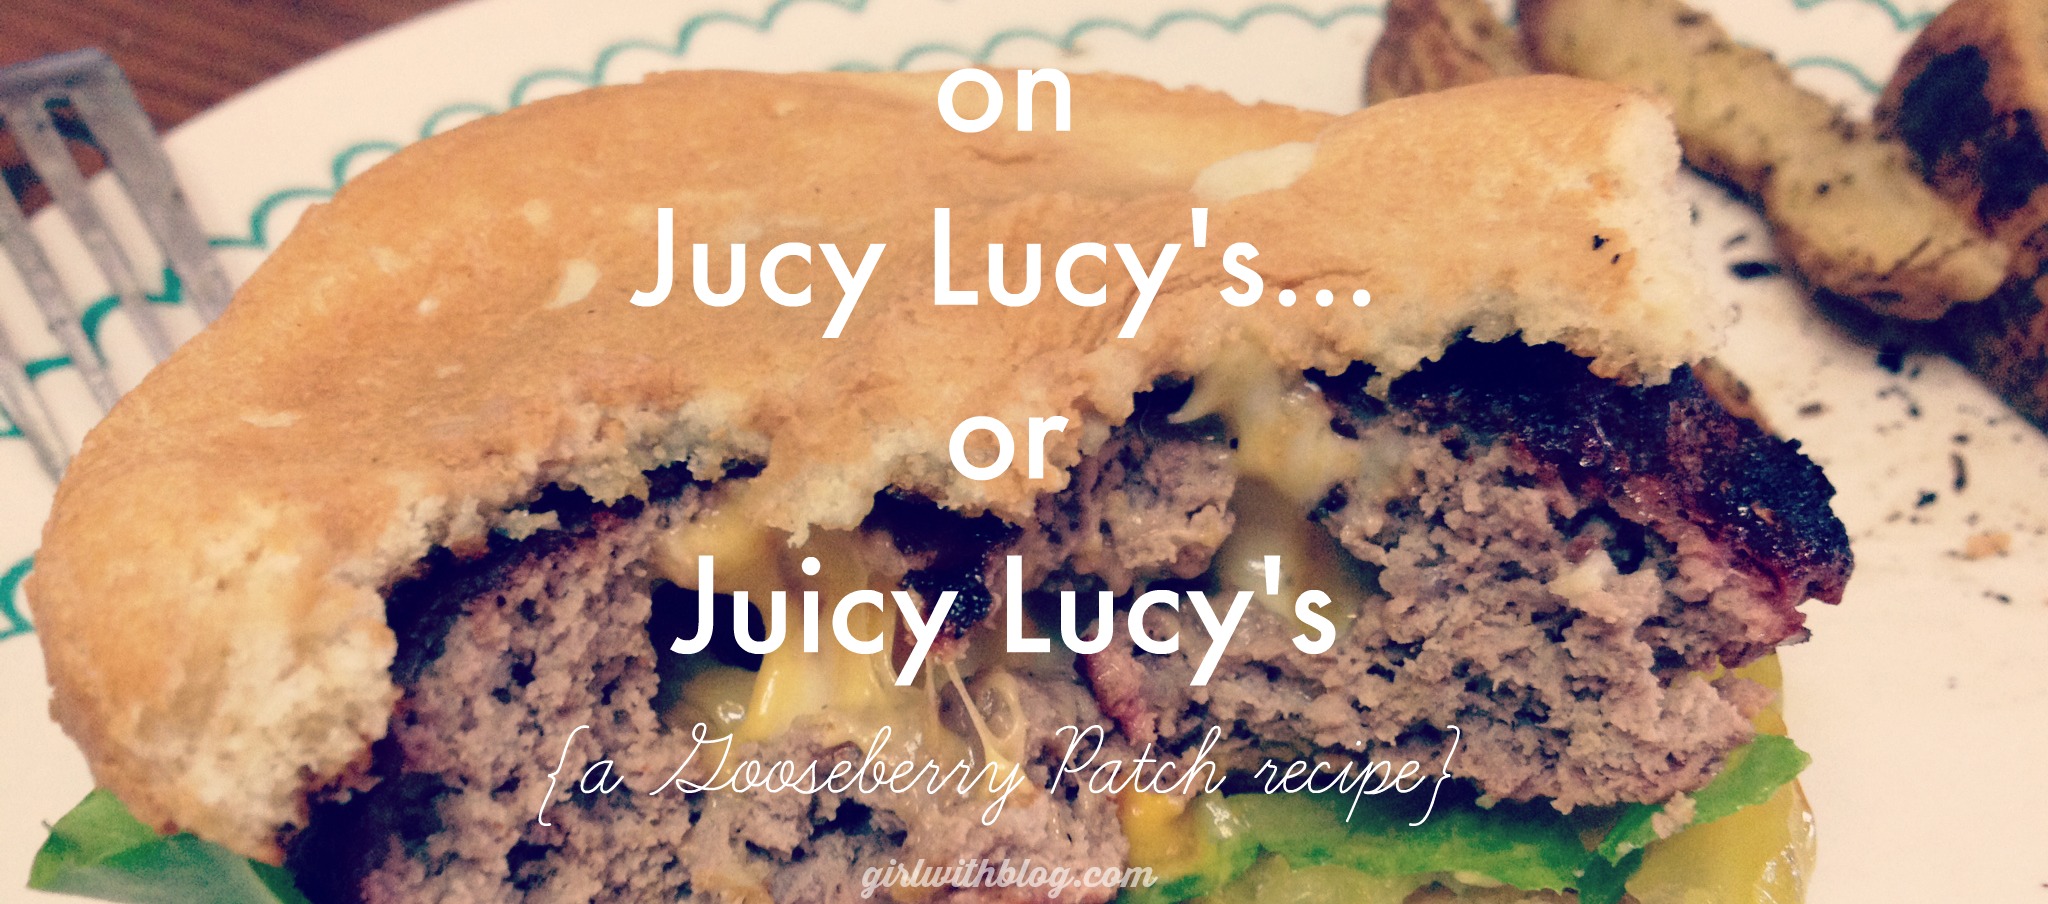 on Jucy Lucy’s… or Juicy Lucy’s? {a Gooseberry Patch recipe}